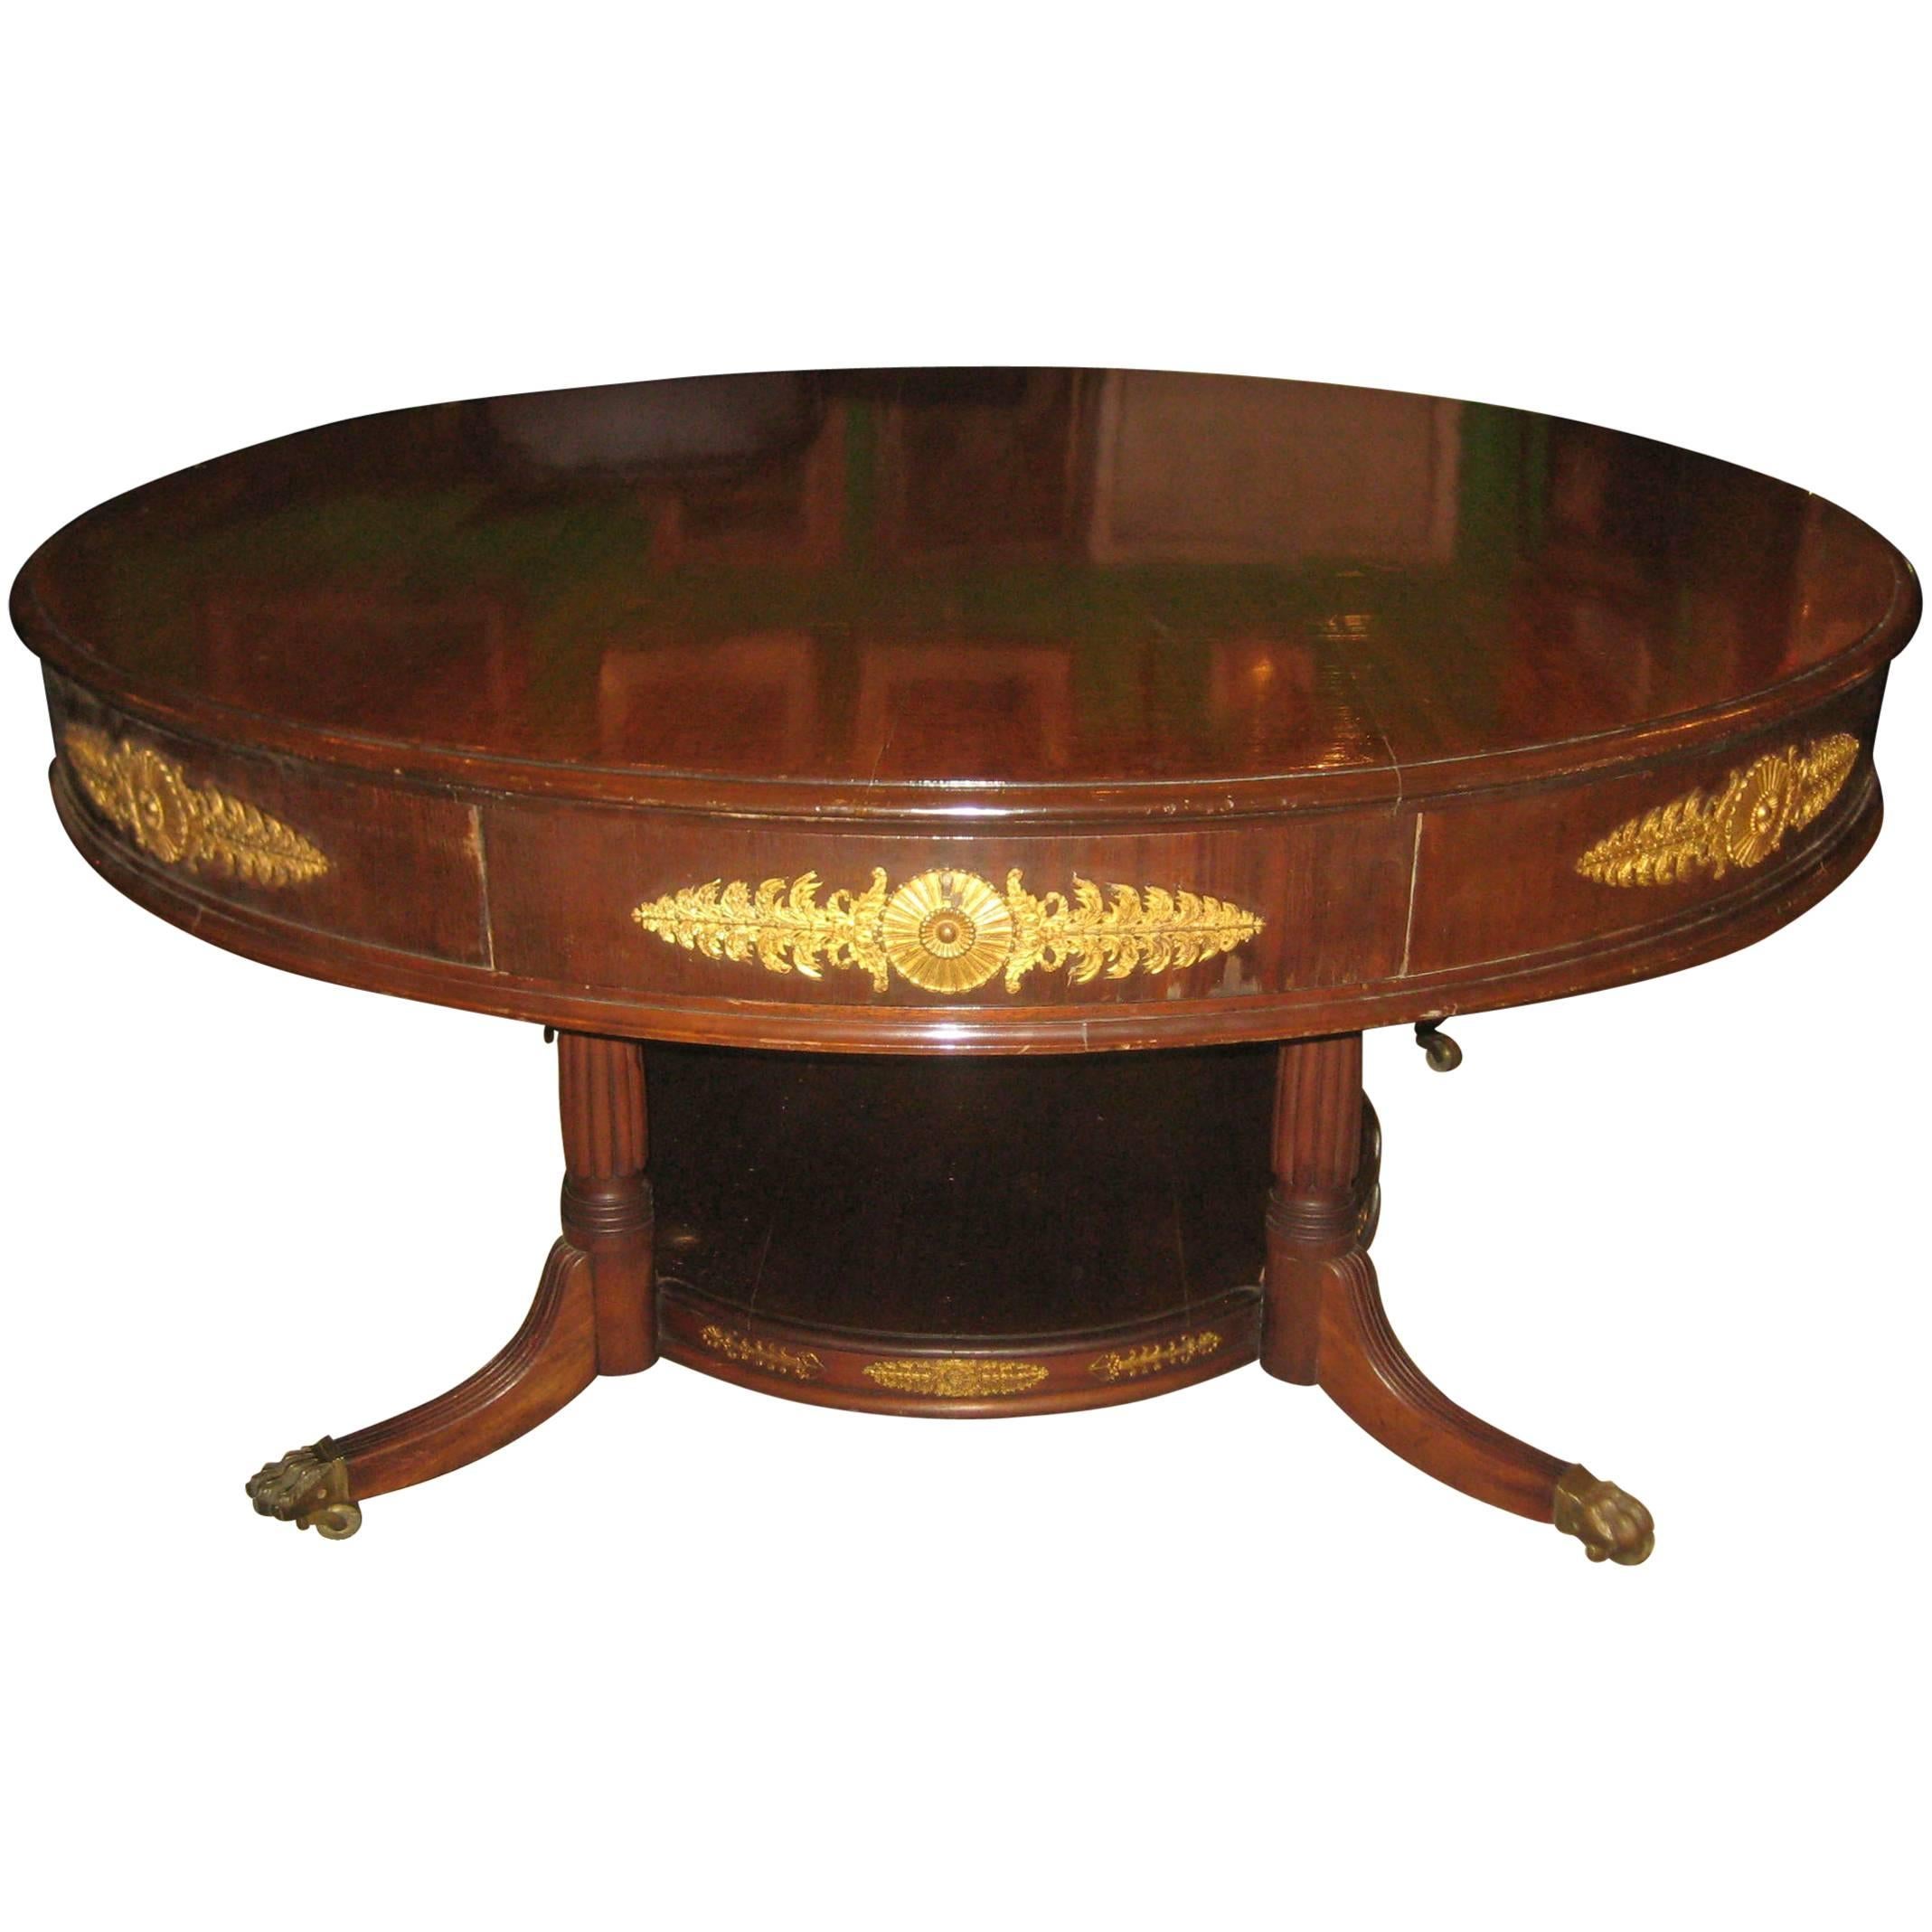 French Empire Mahogany and Gilt Bronze-Mounted Four-Drawer Center Table For Sale